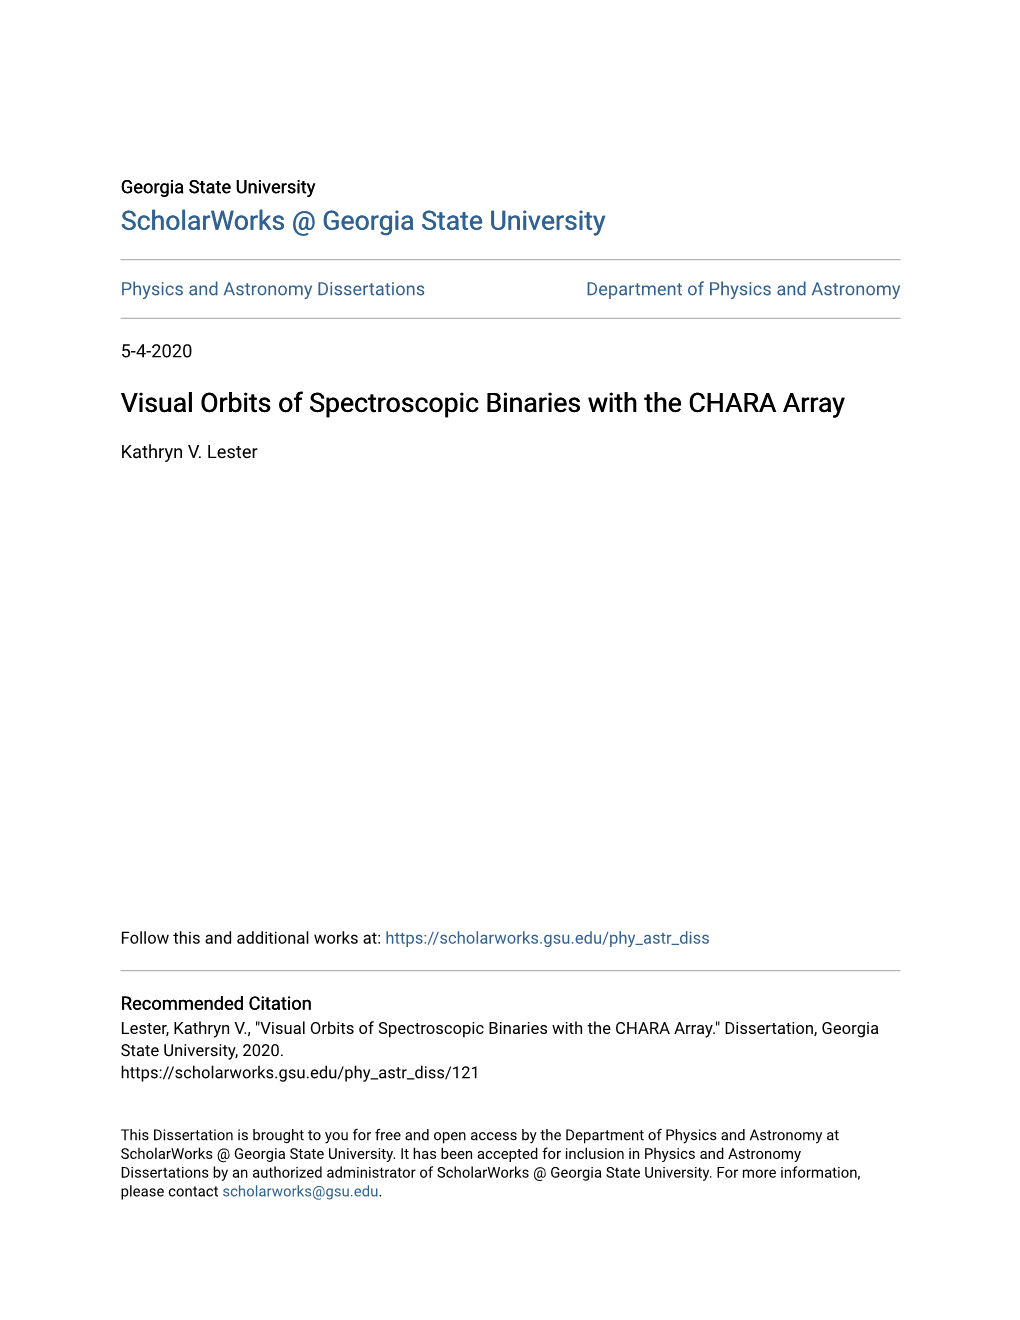 Visual Orbits of Spectroscopic Binaries with the CHARA Array